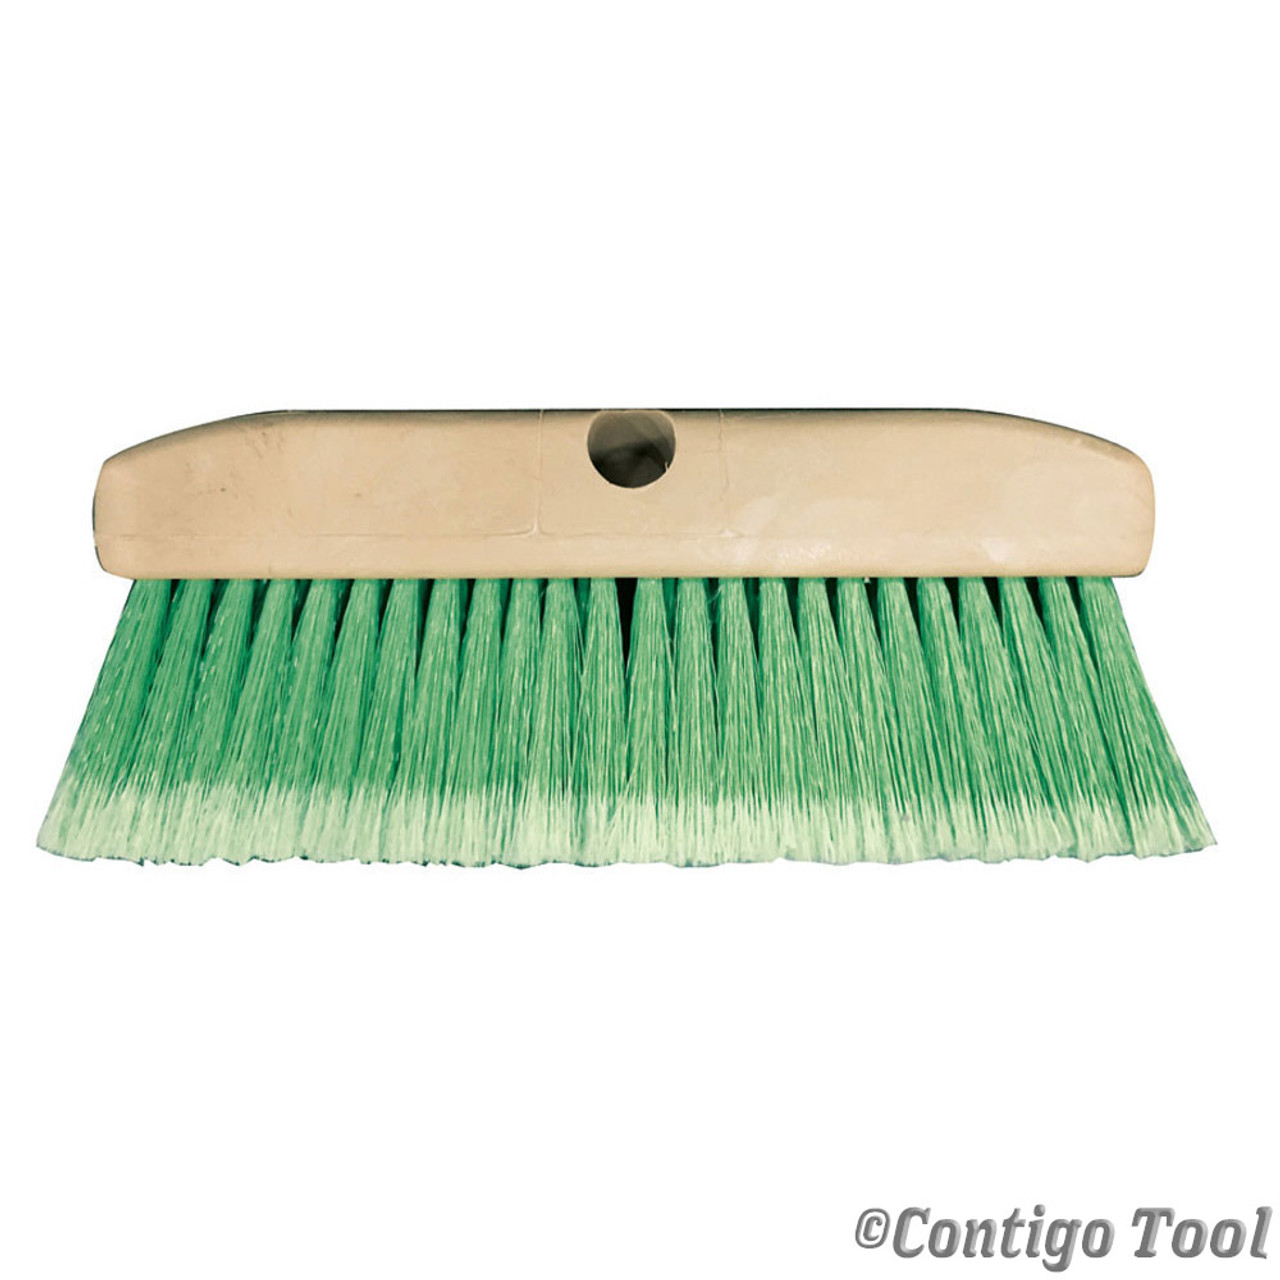 Stain Brush, Laundry Brush for Removing Stains